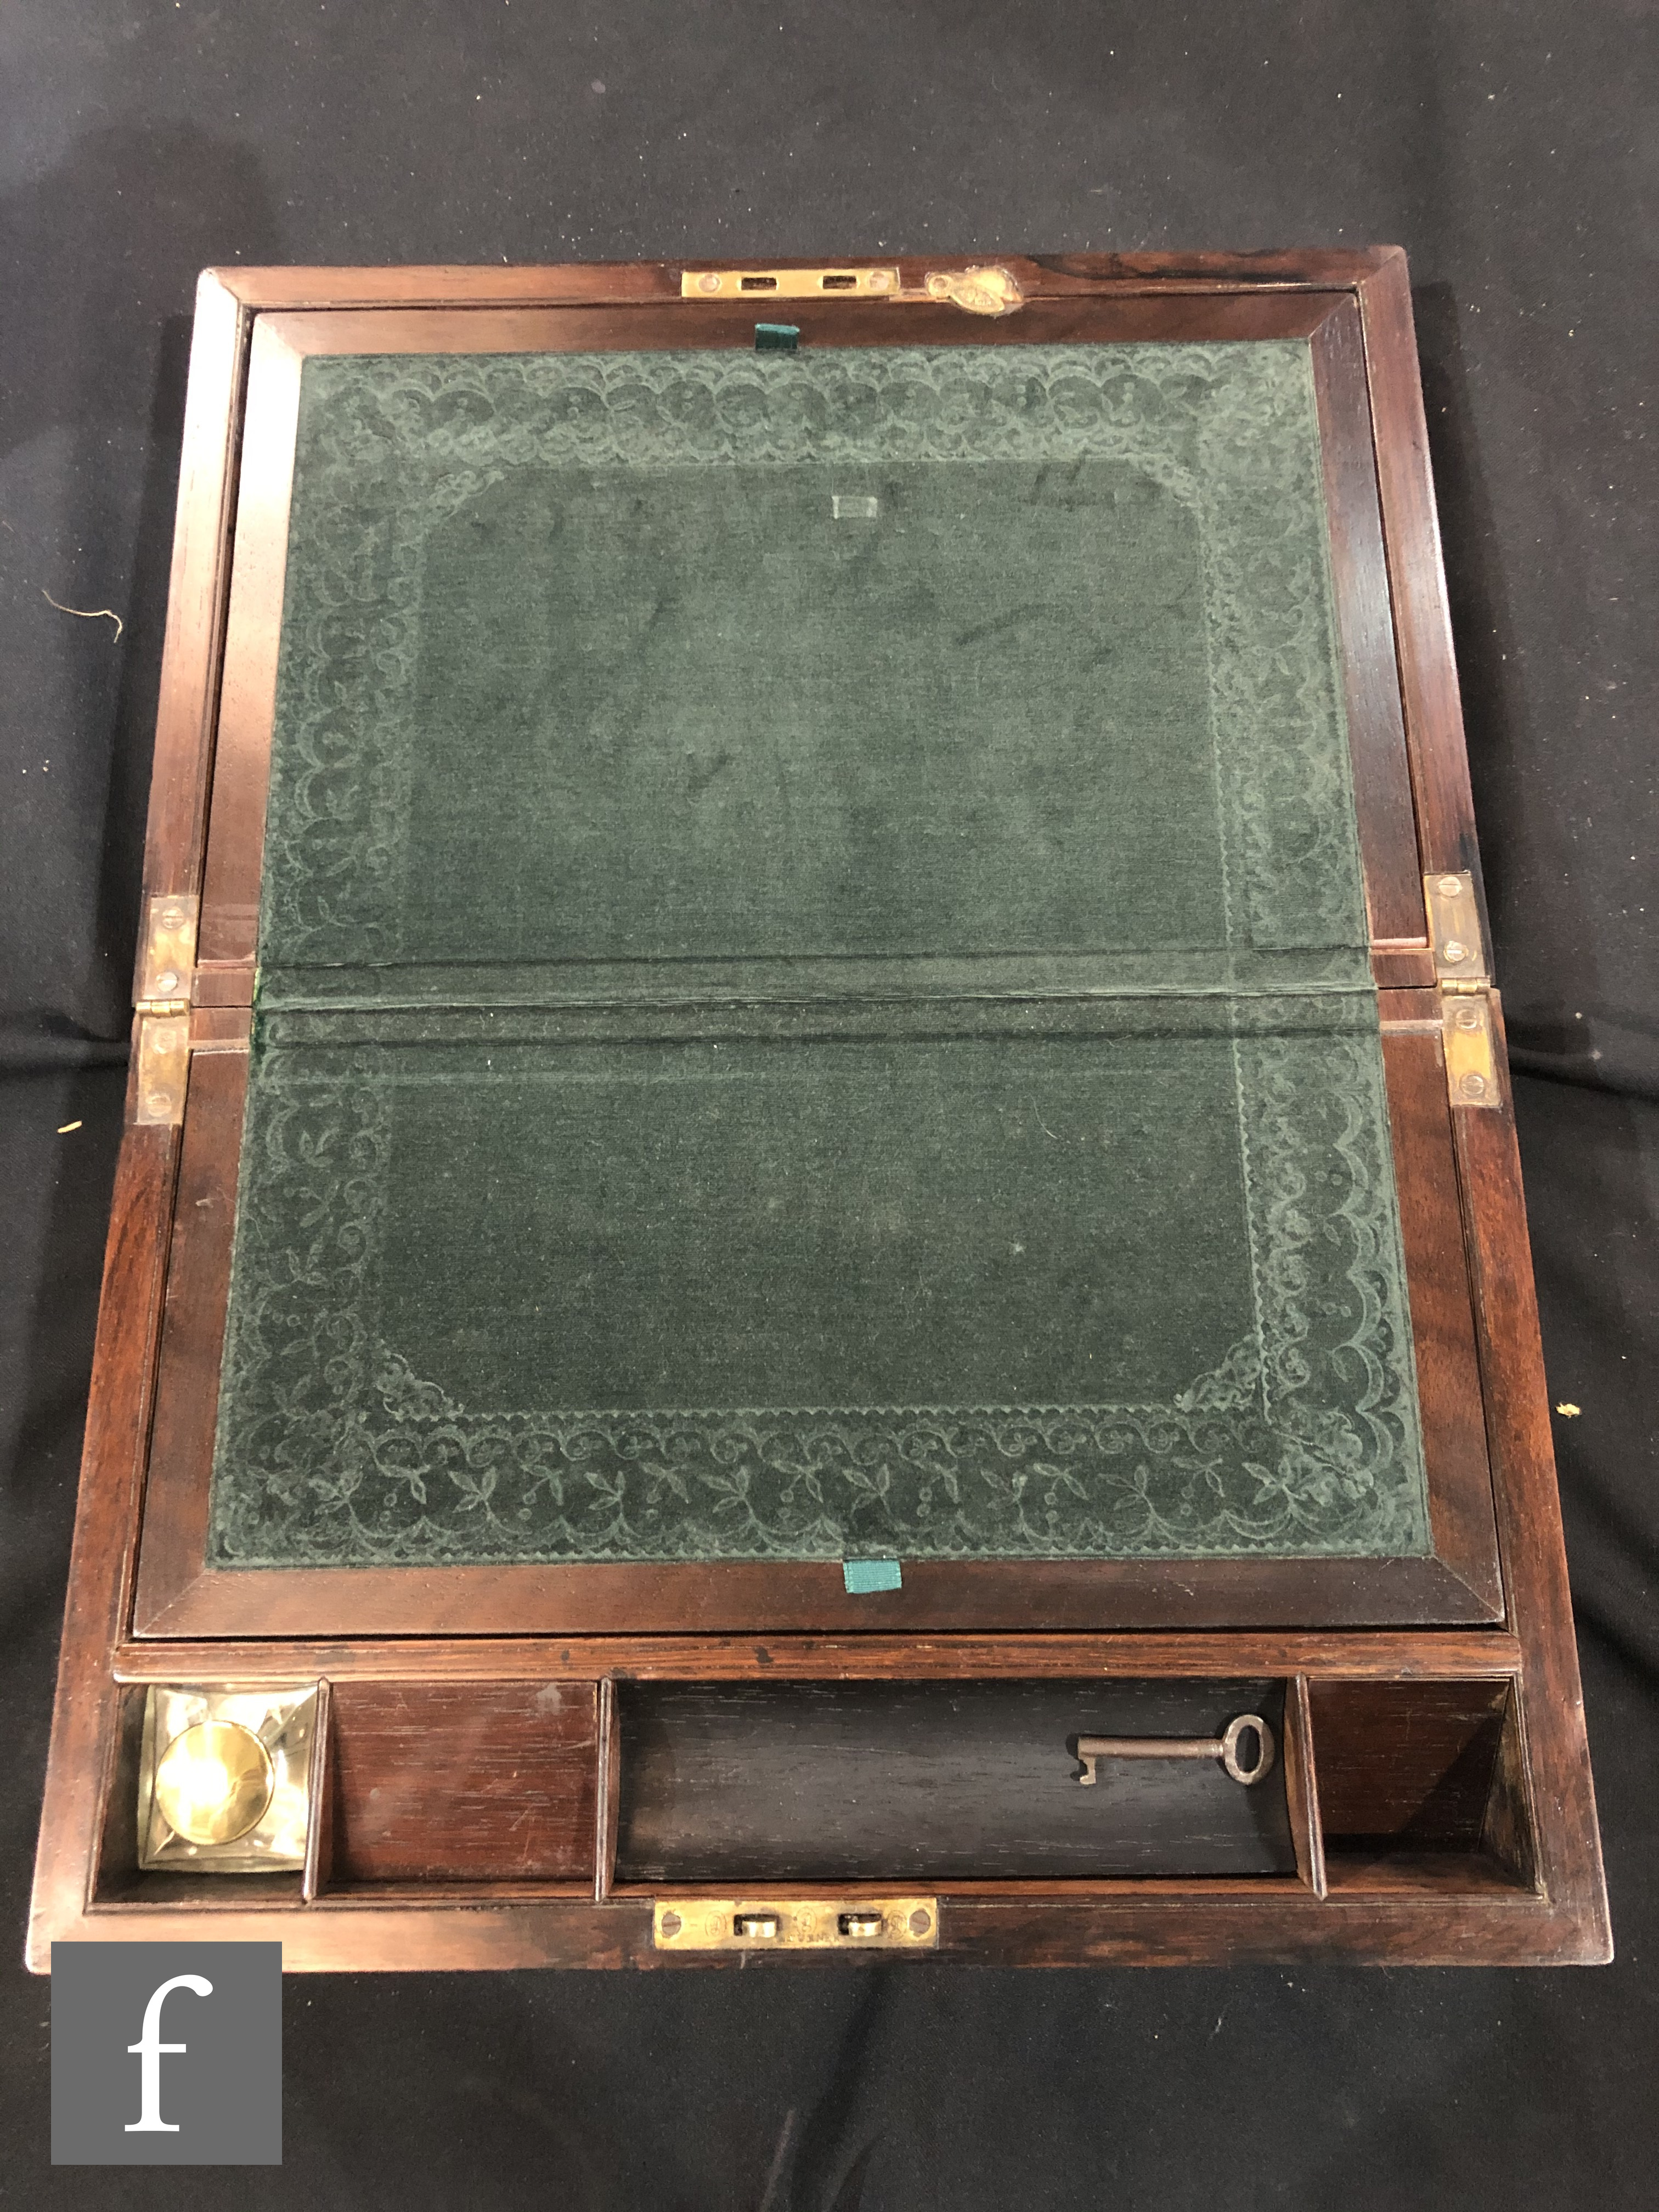 A 19th century brass inlaid writing box with recessed carrying handles with hidden secret drawer - Image 2 of 5